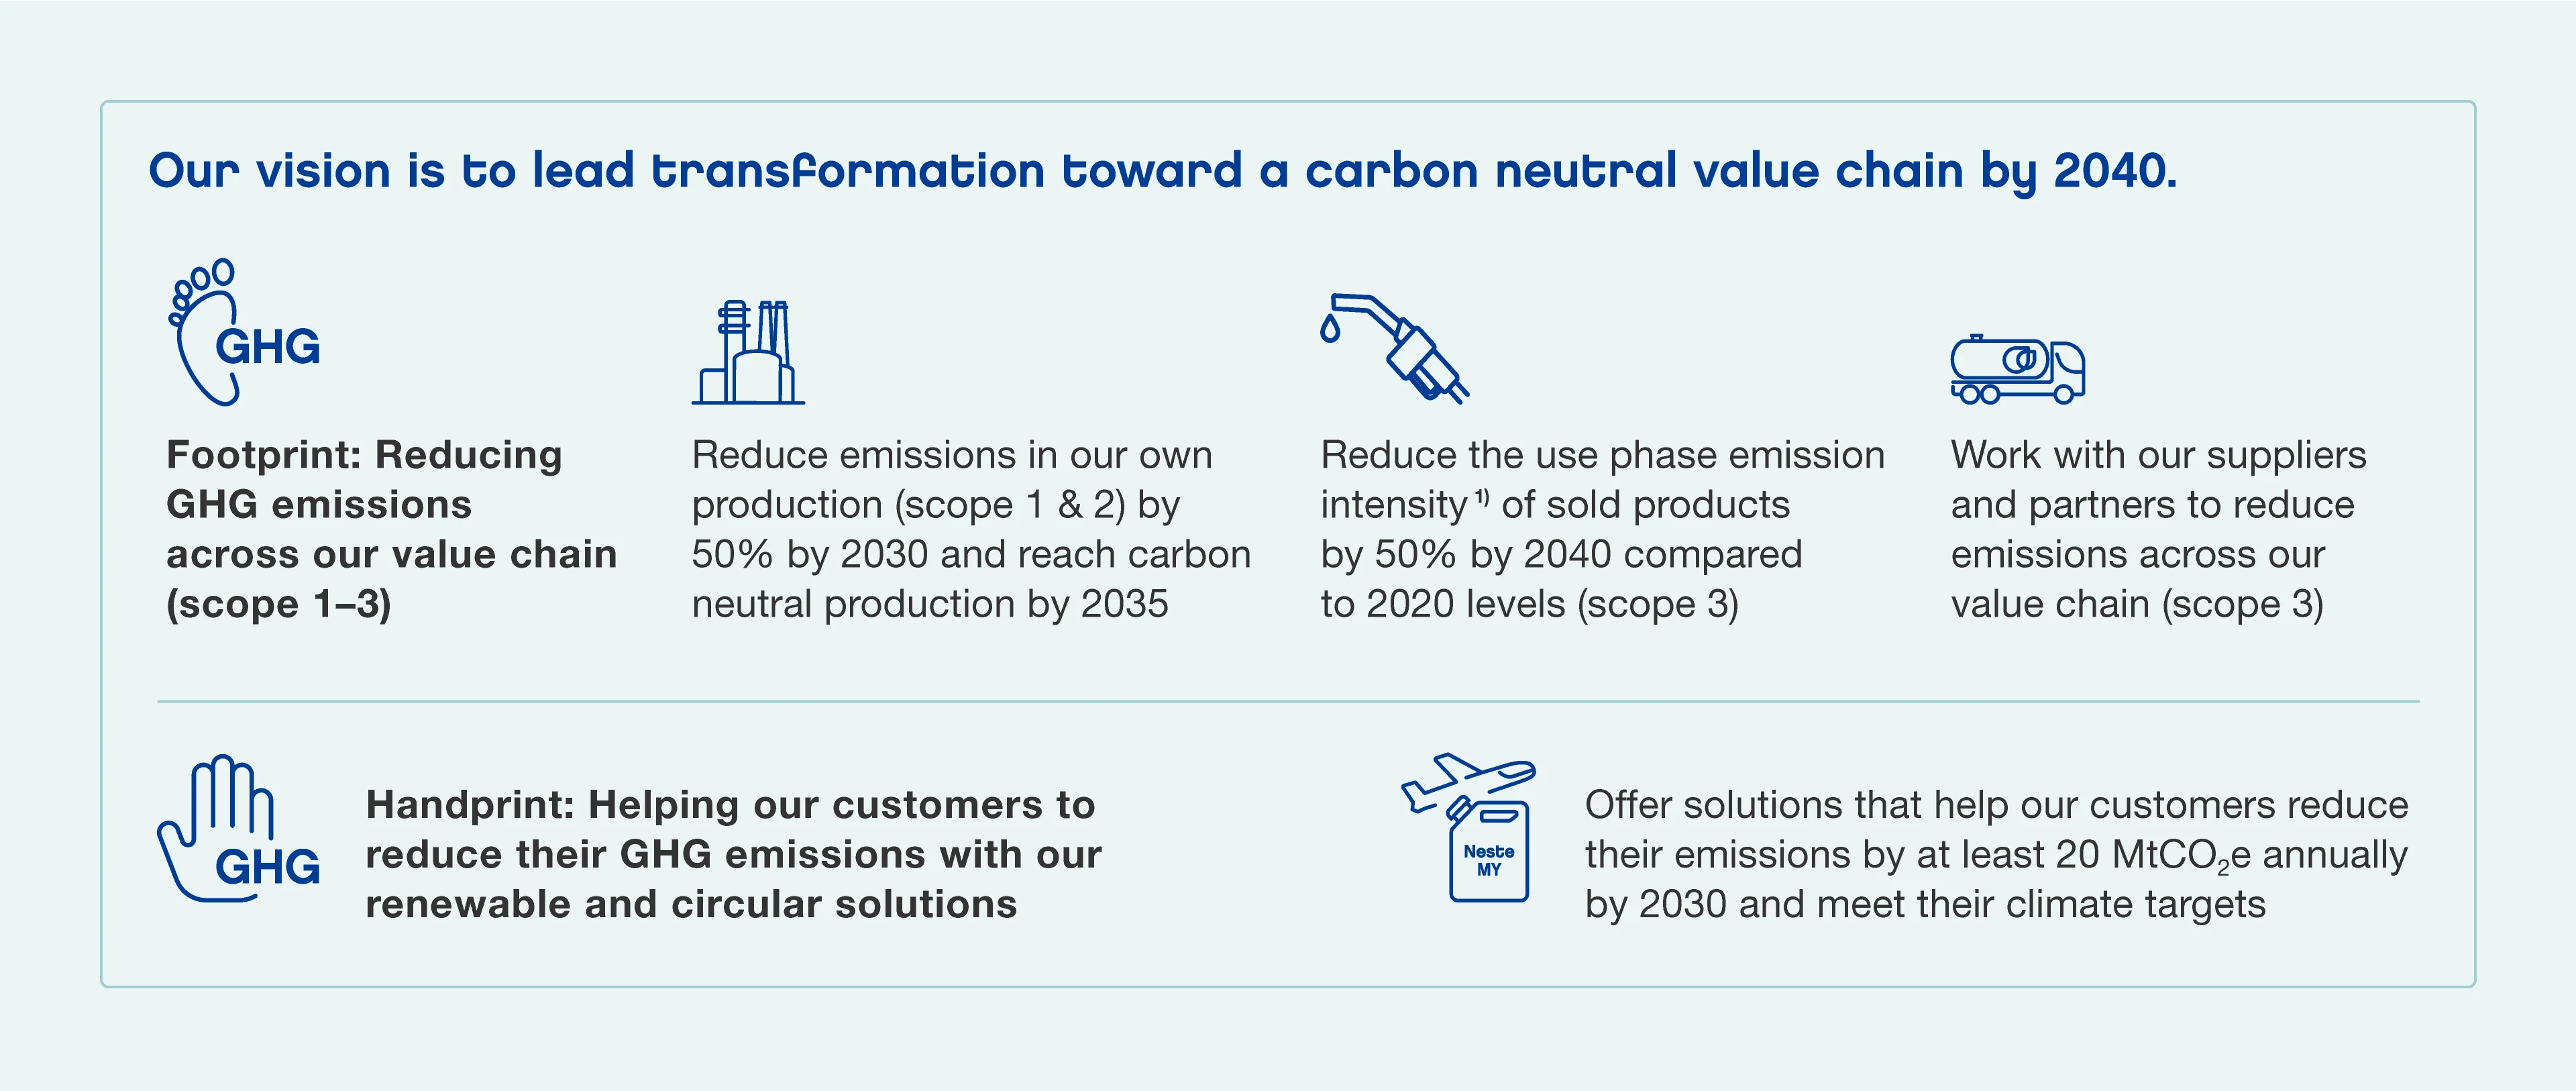 Our vision to lead transformation toward a carbon neutral value chain by 2040